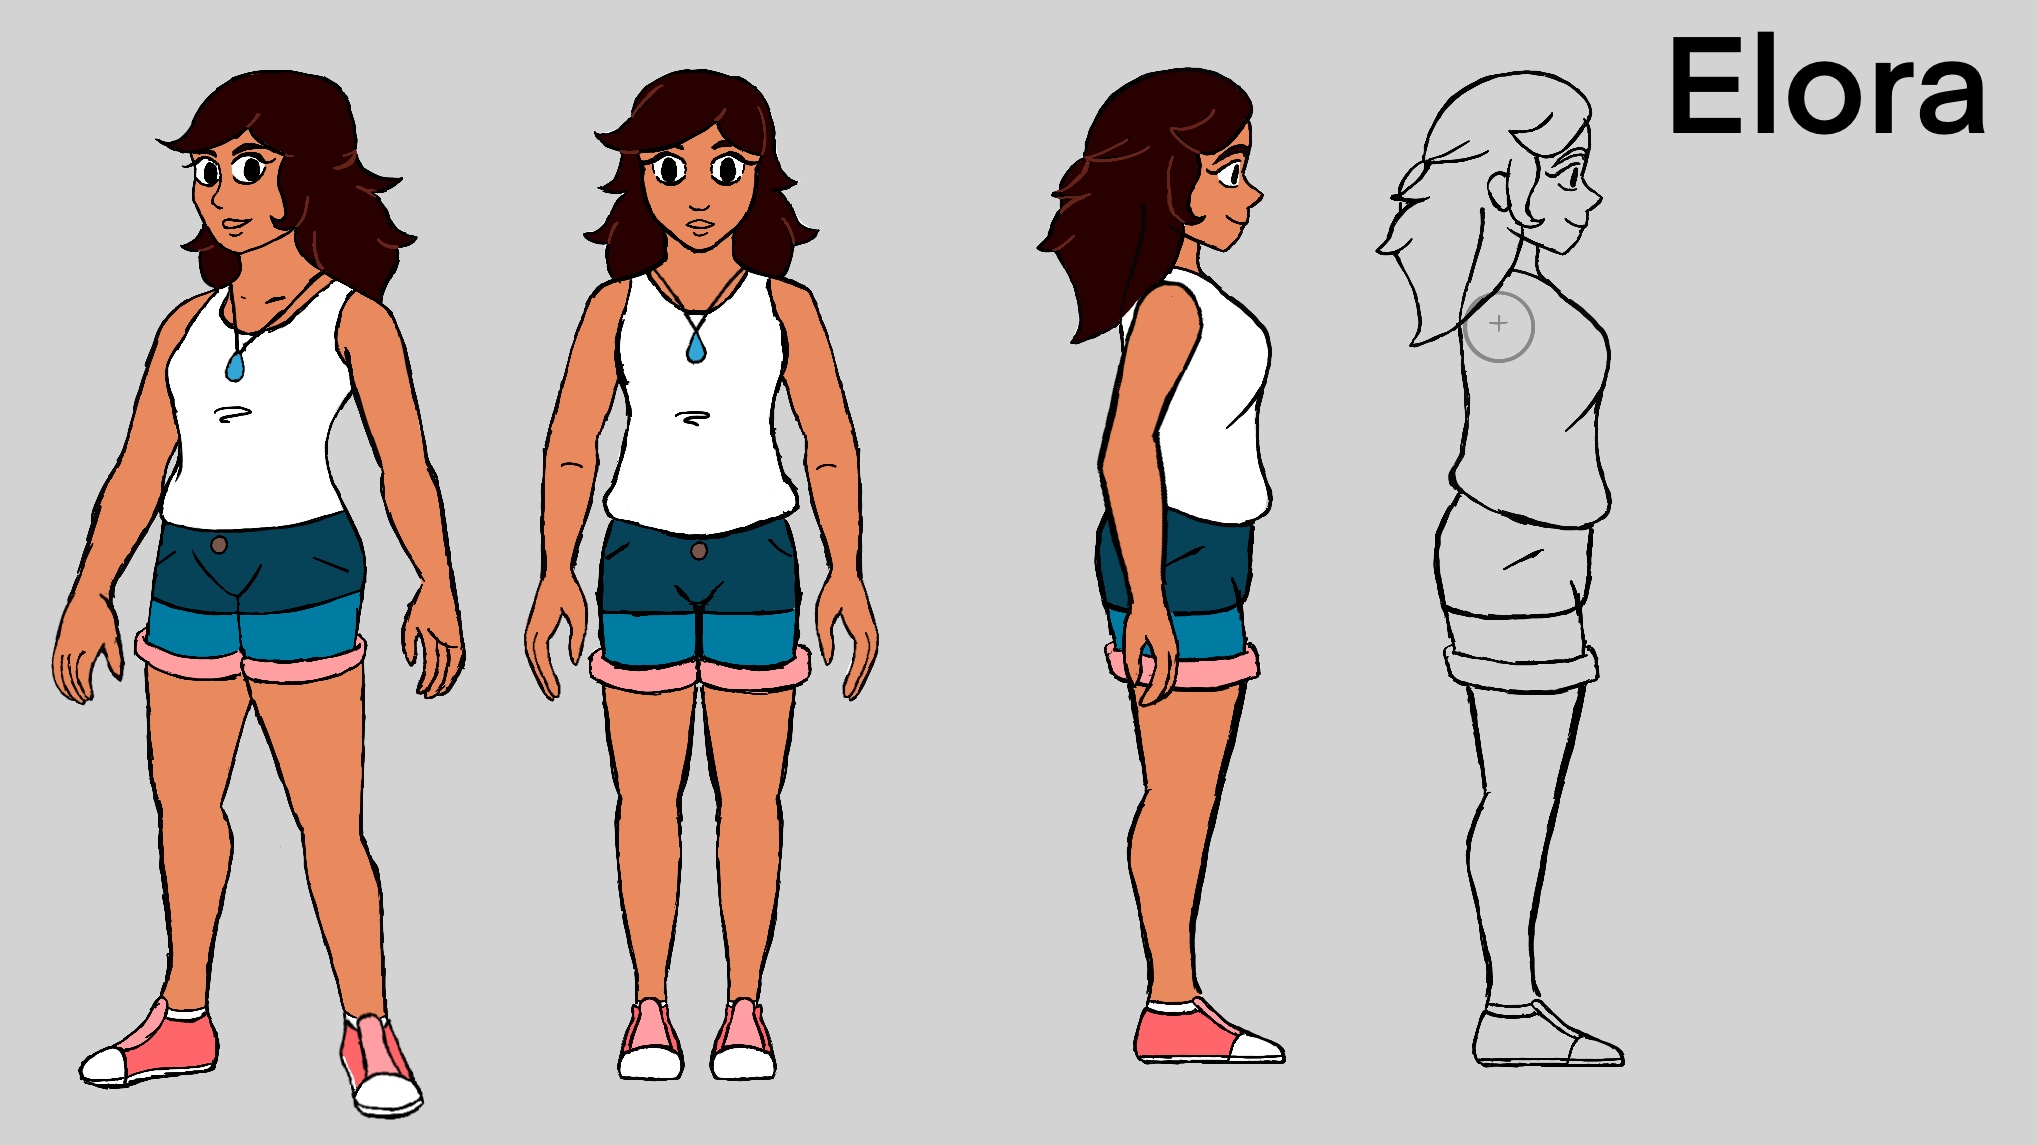 A character turnaround sheet. This character is the protagonist of a pitched animated series, Marine,